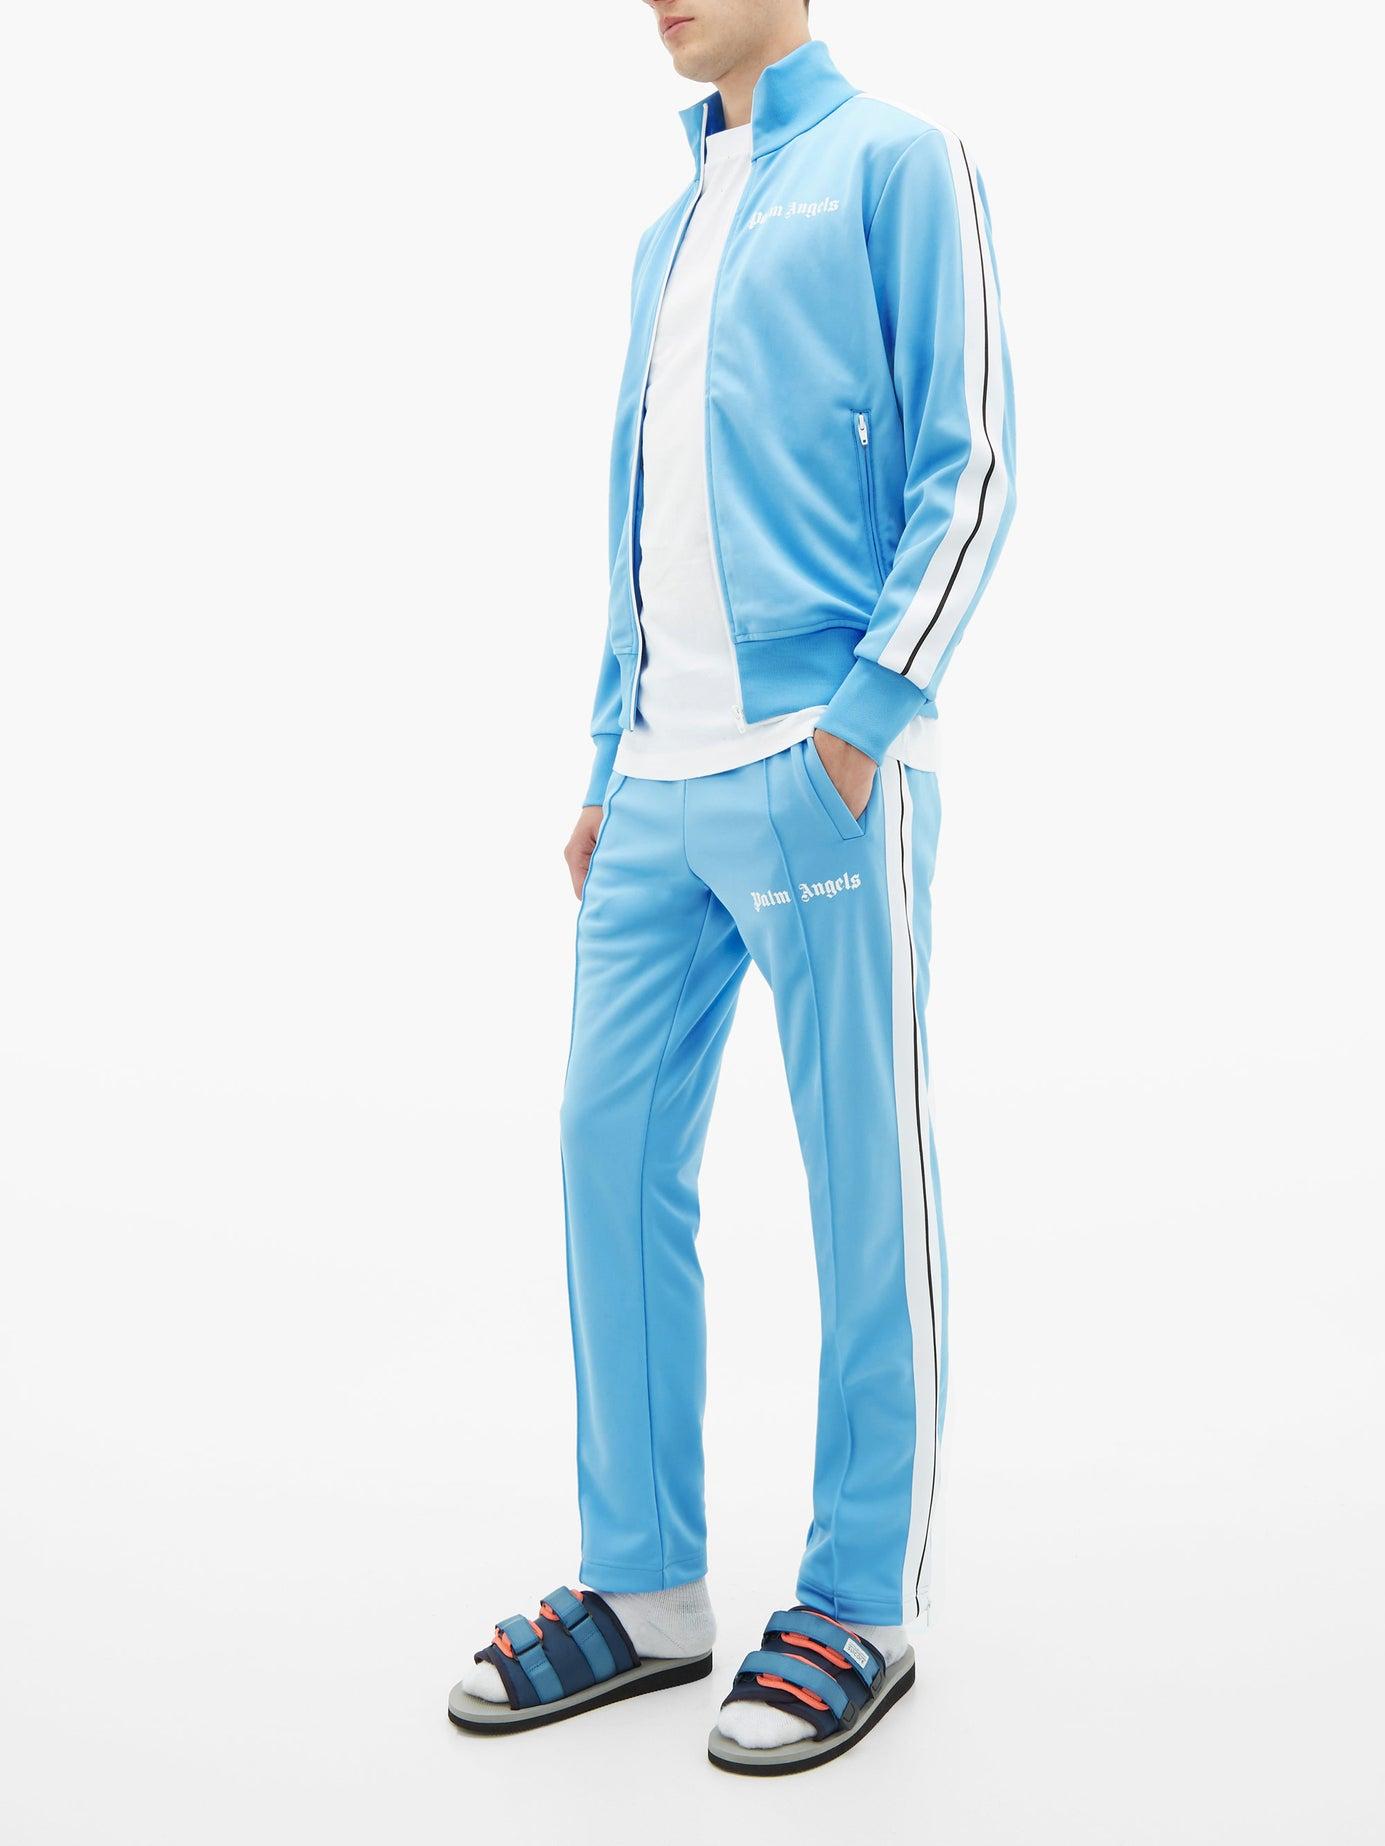 palm angels tracksuit baby blue